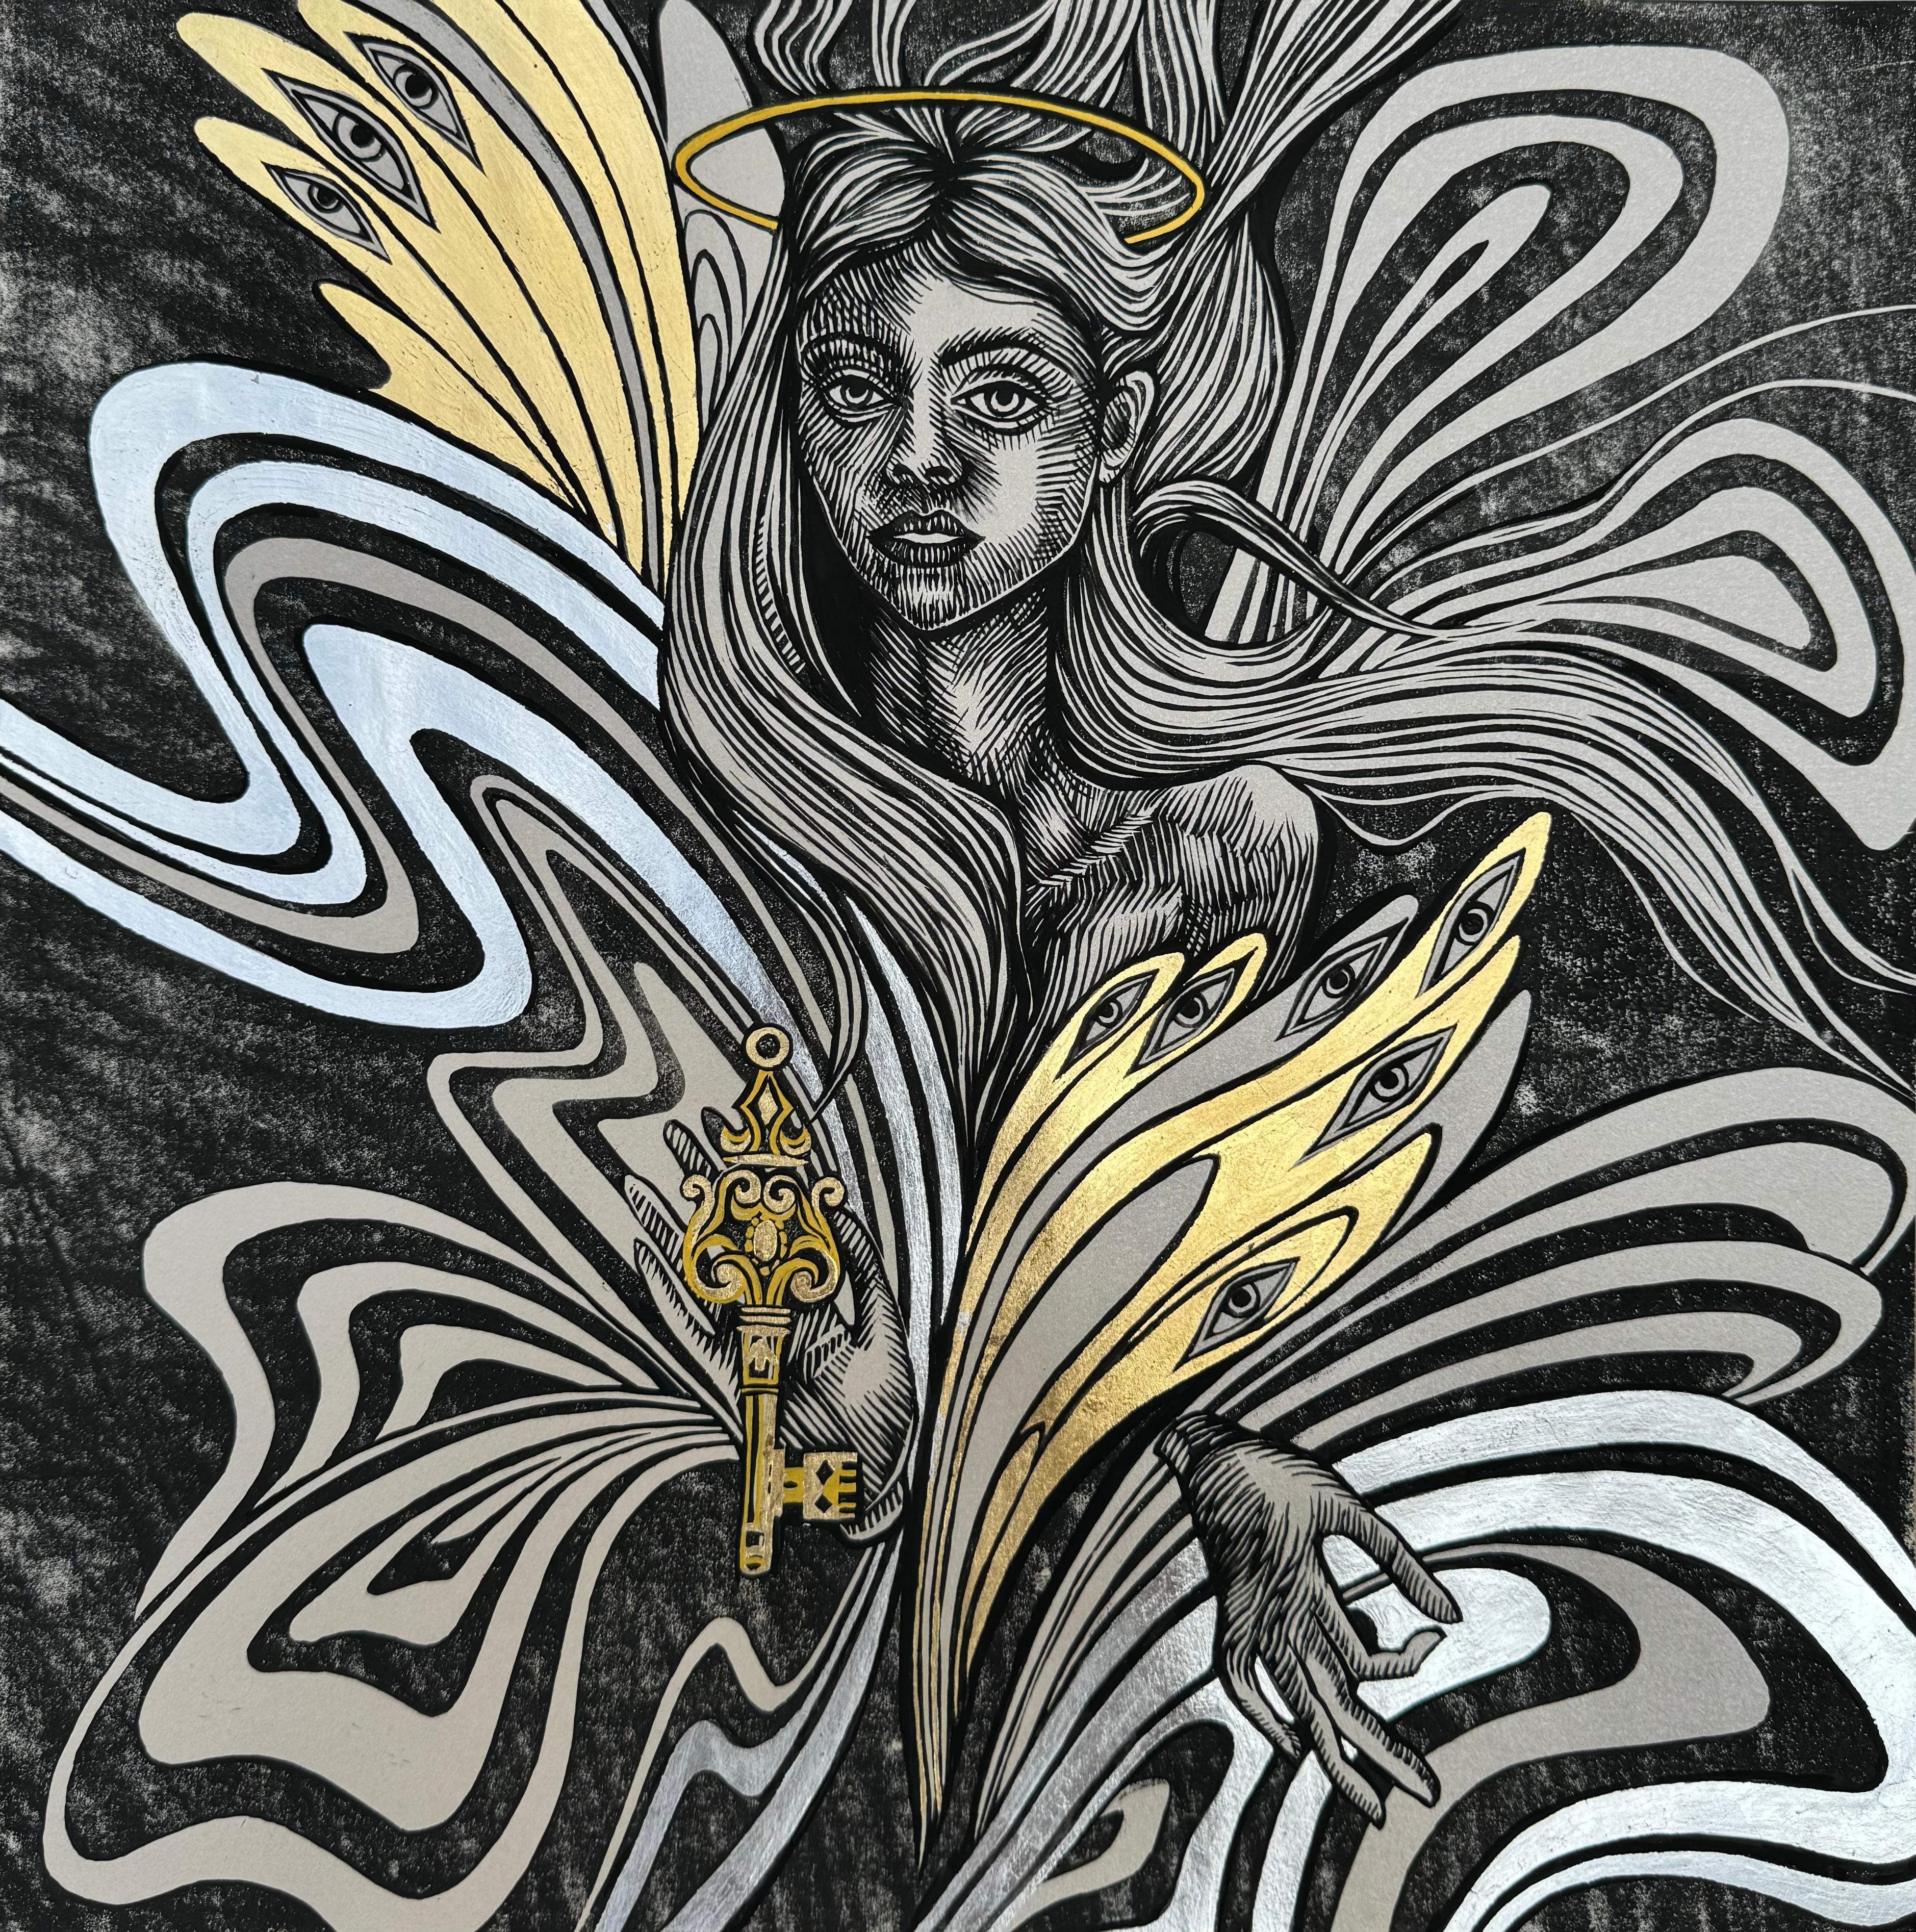 A 12” x 12” x .75" Surrealism Figurative Artwork by artist Evgeniya Golik. This piece is Handmade Linocut Print with Gold and Silver Leaf on Pearl Paper. A certificate of authenticity will accompany the piece upon its purchase or delivery.